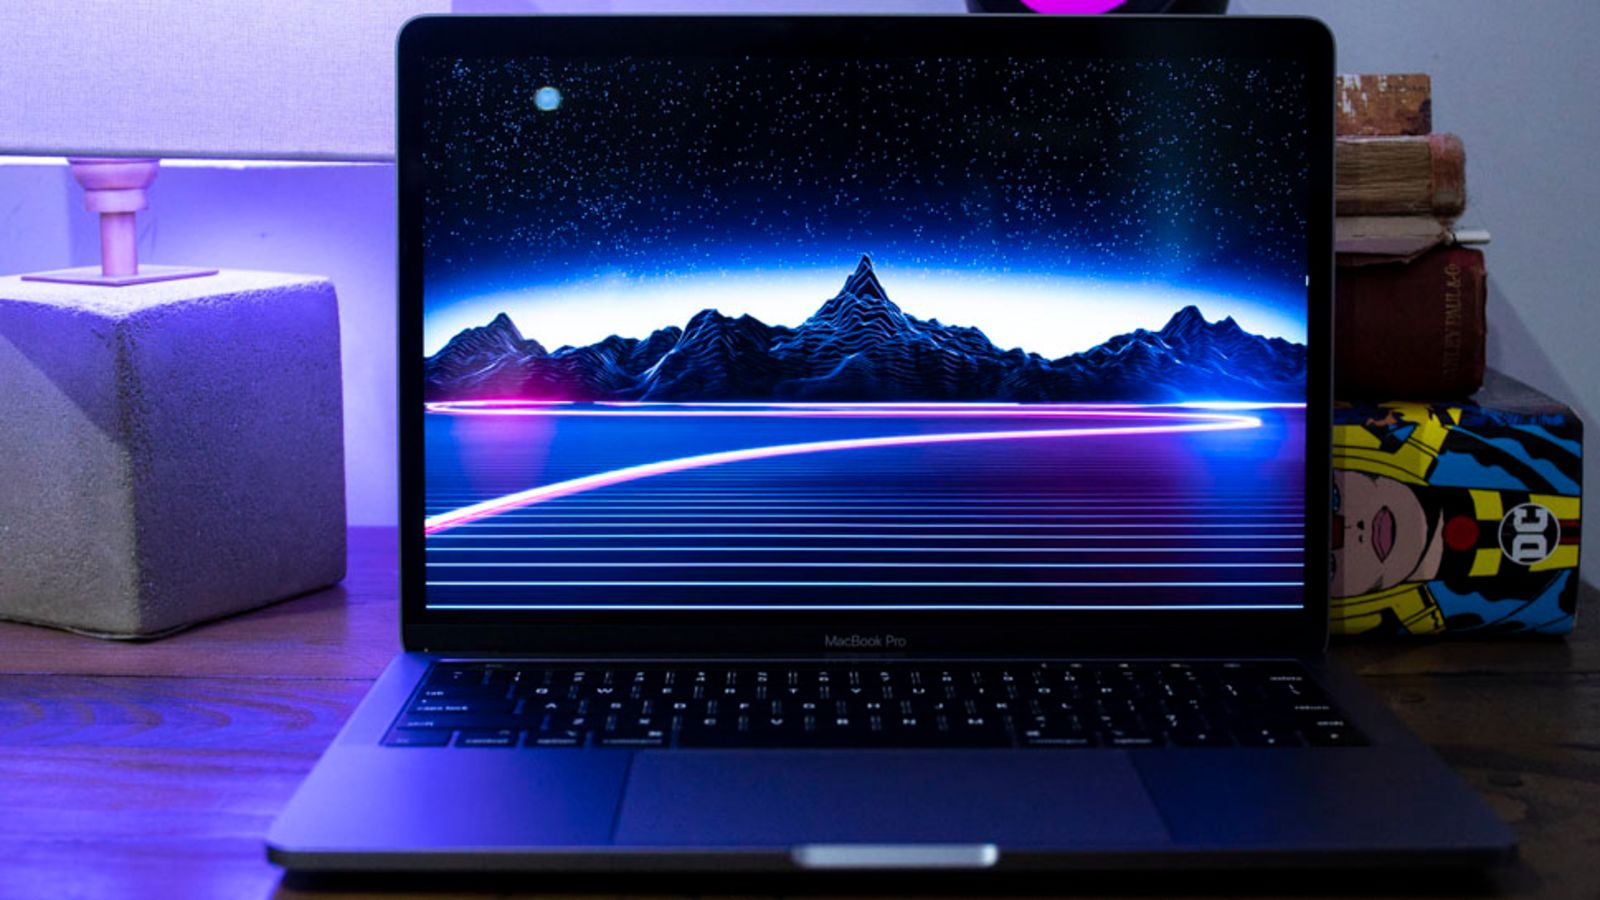 Software included with macbook pro